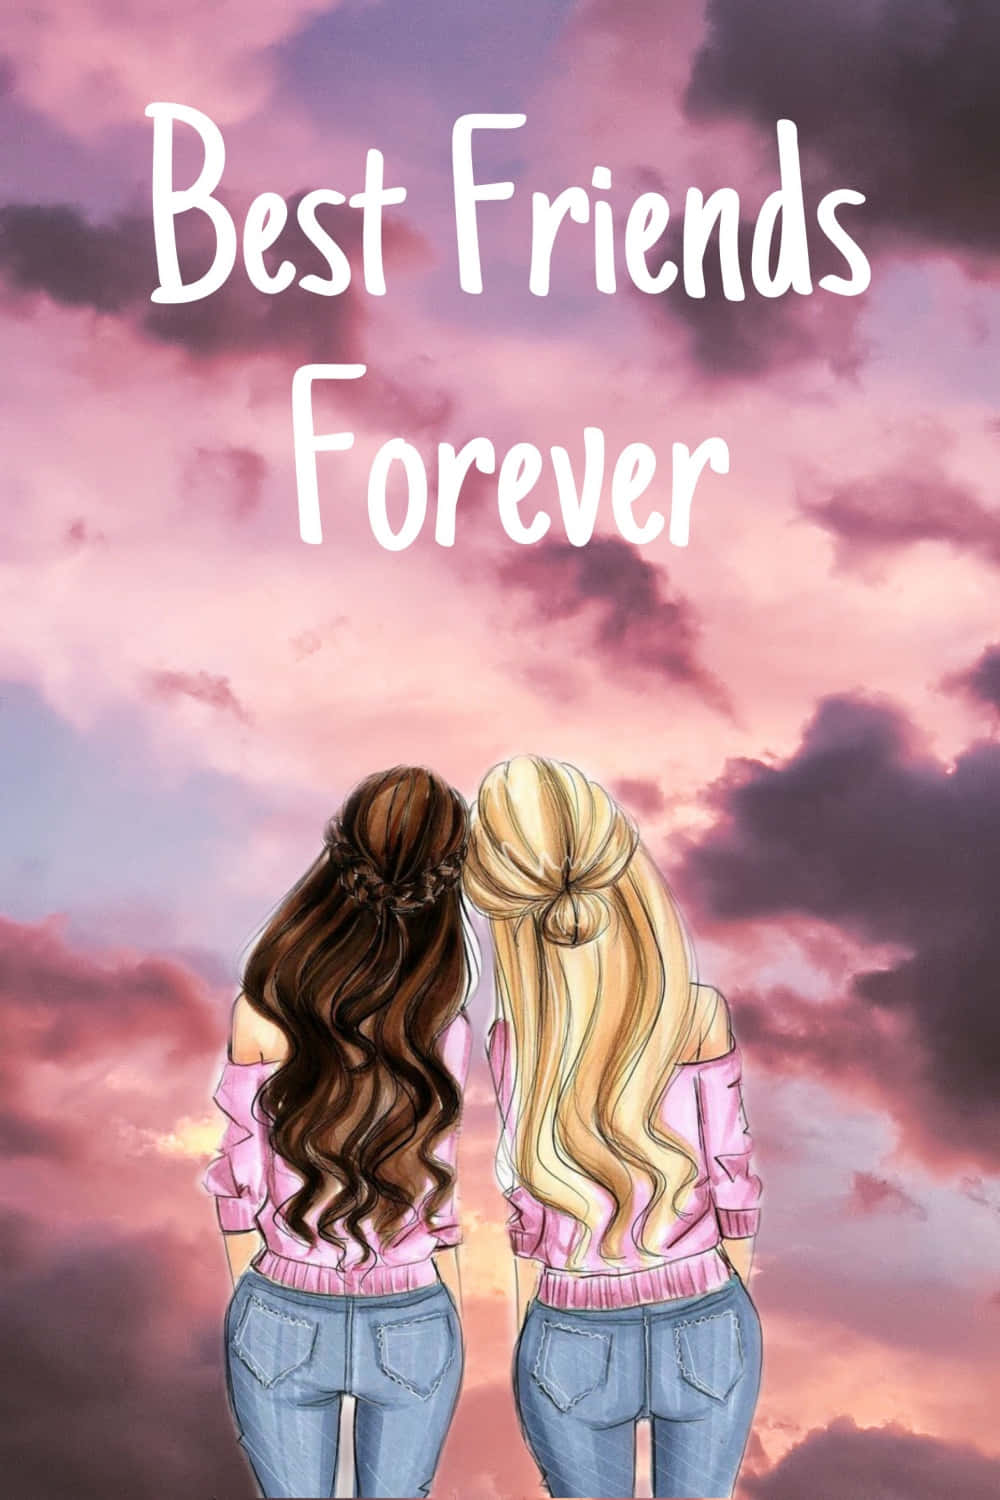 Download Best Friends Forever Cute Bff Picture 